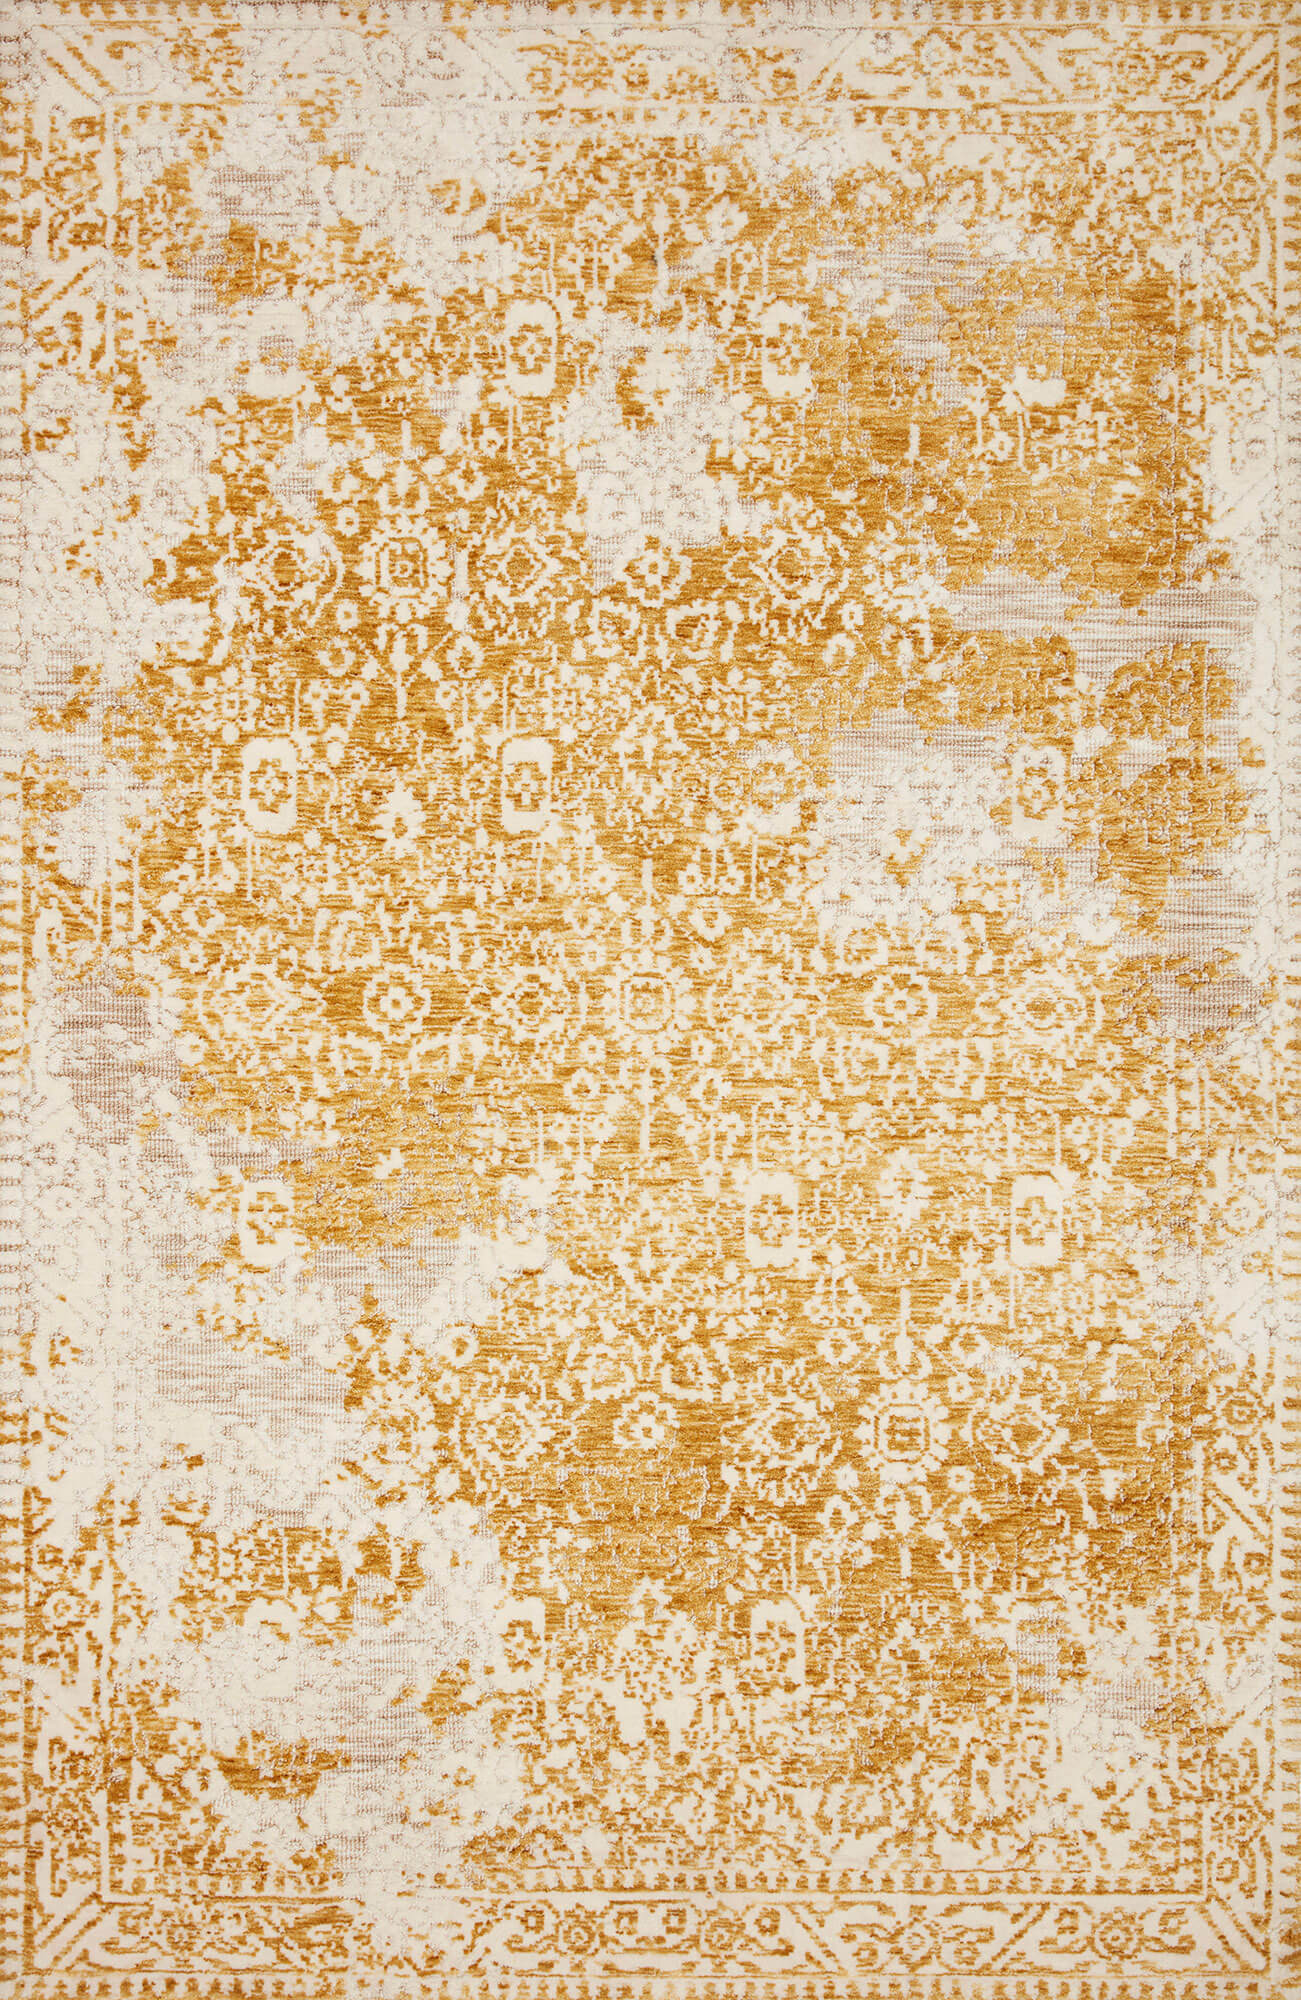 Magnolia Home By Joanna Gaines x Loloi Lindsay Rug - Gold & Antique White